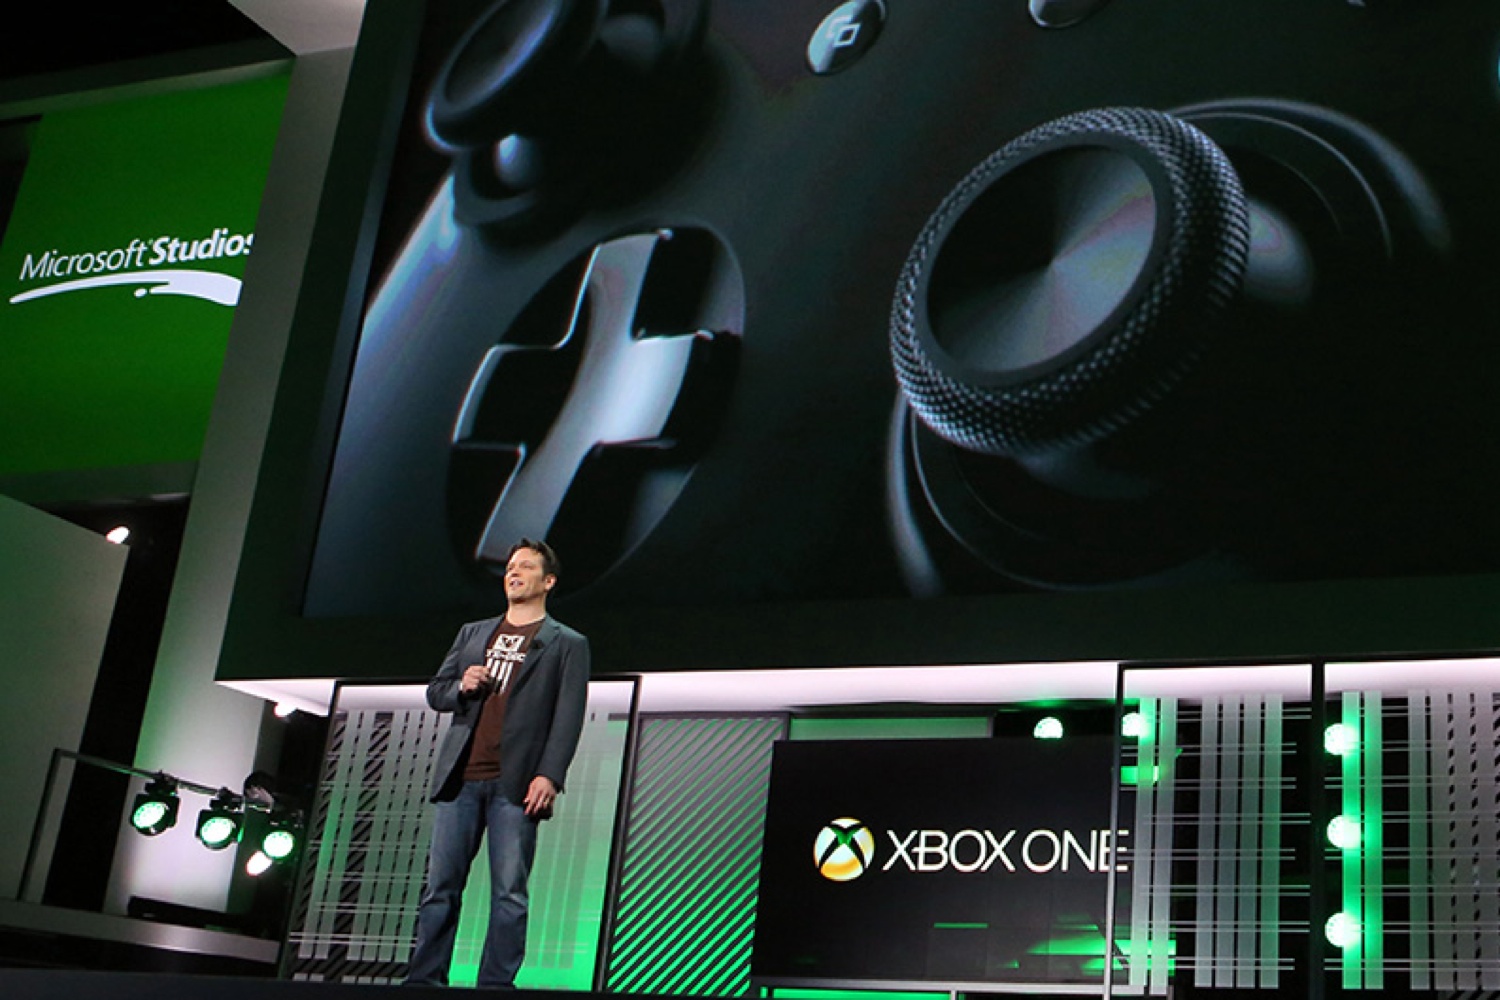 Phil Spencer on stage at the Xbox E3 2013 media briefing. (Casey Rodgers / Invision)